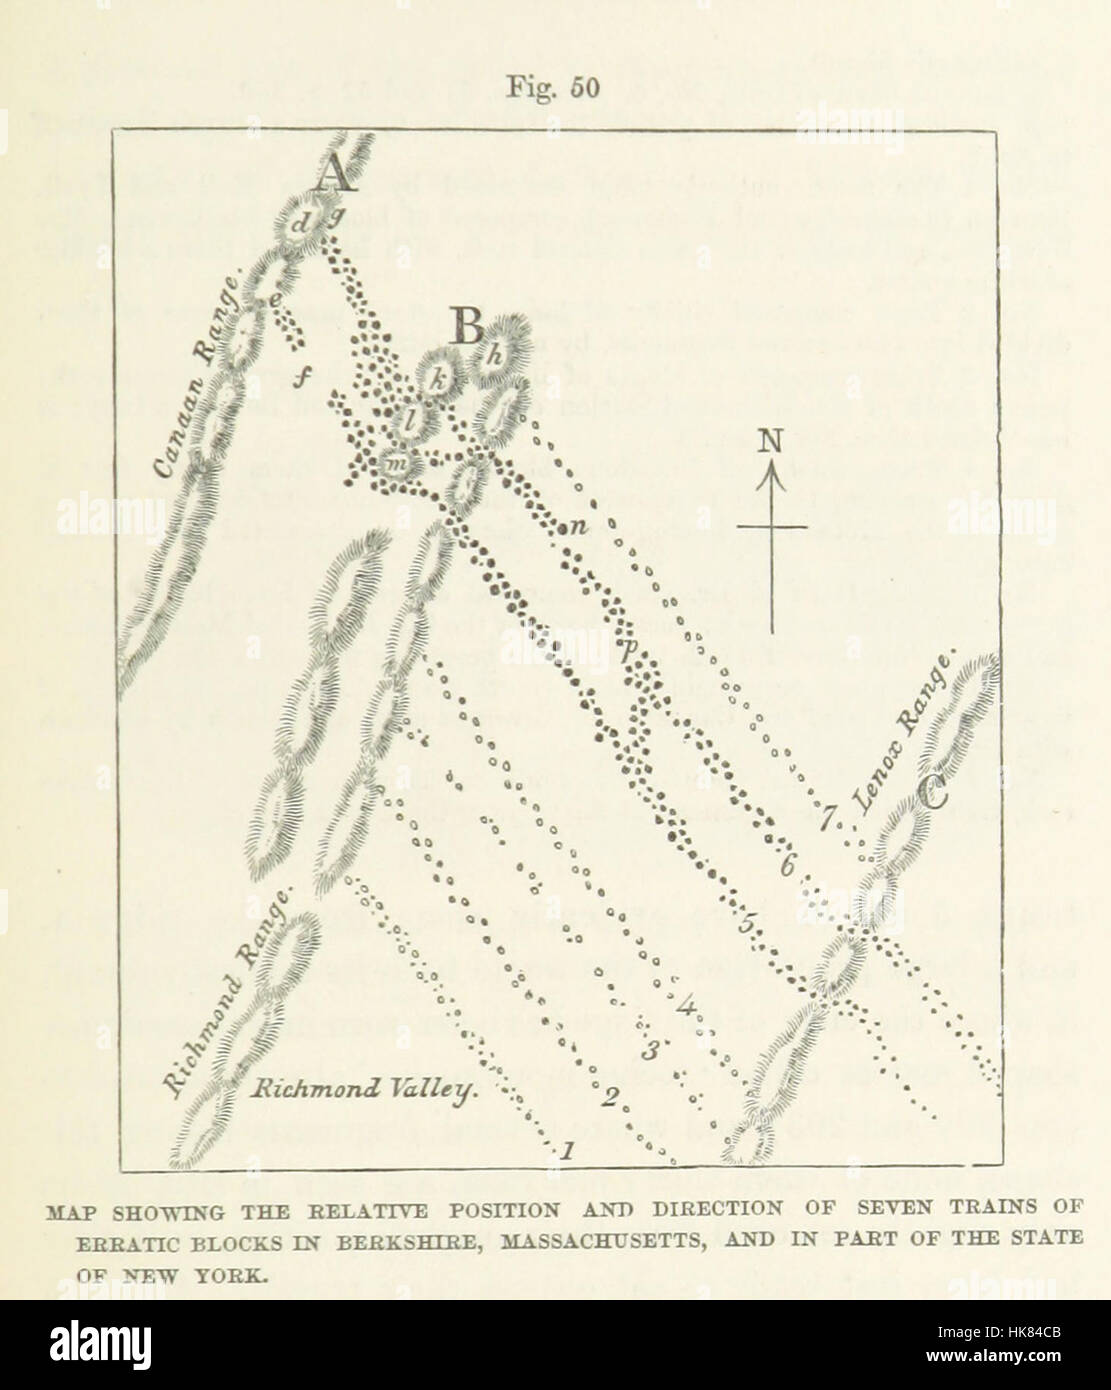 Image taken from page 383 of 'The Geological Evidences of the Antiquity of Man, with remarks on theories of the origin of species by variation. Illustrated by woodcuts' Image taken from page 383 of 'The Geological Stock Photo